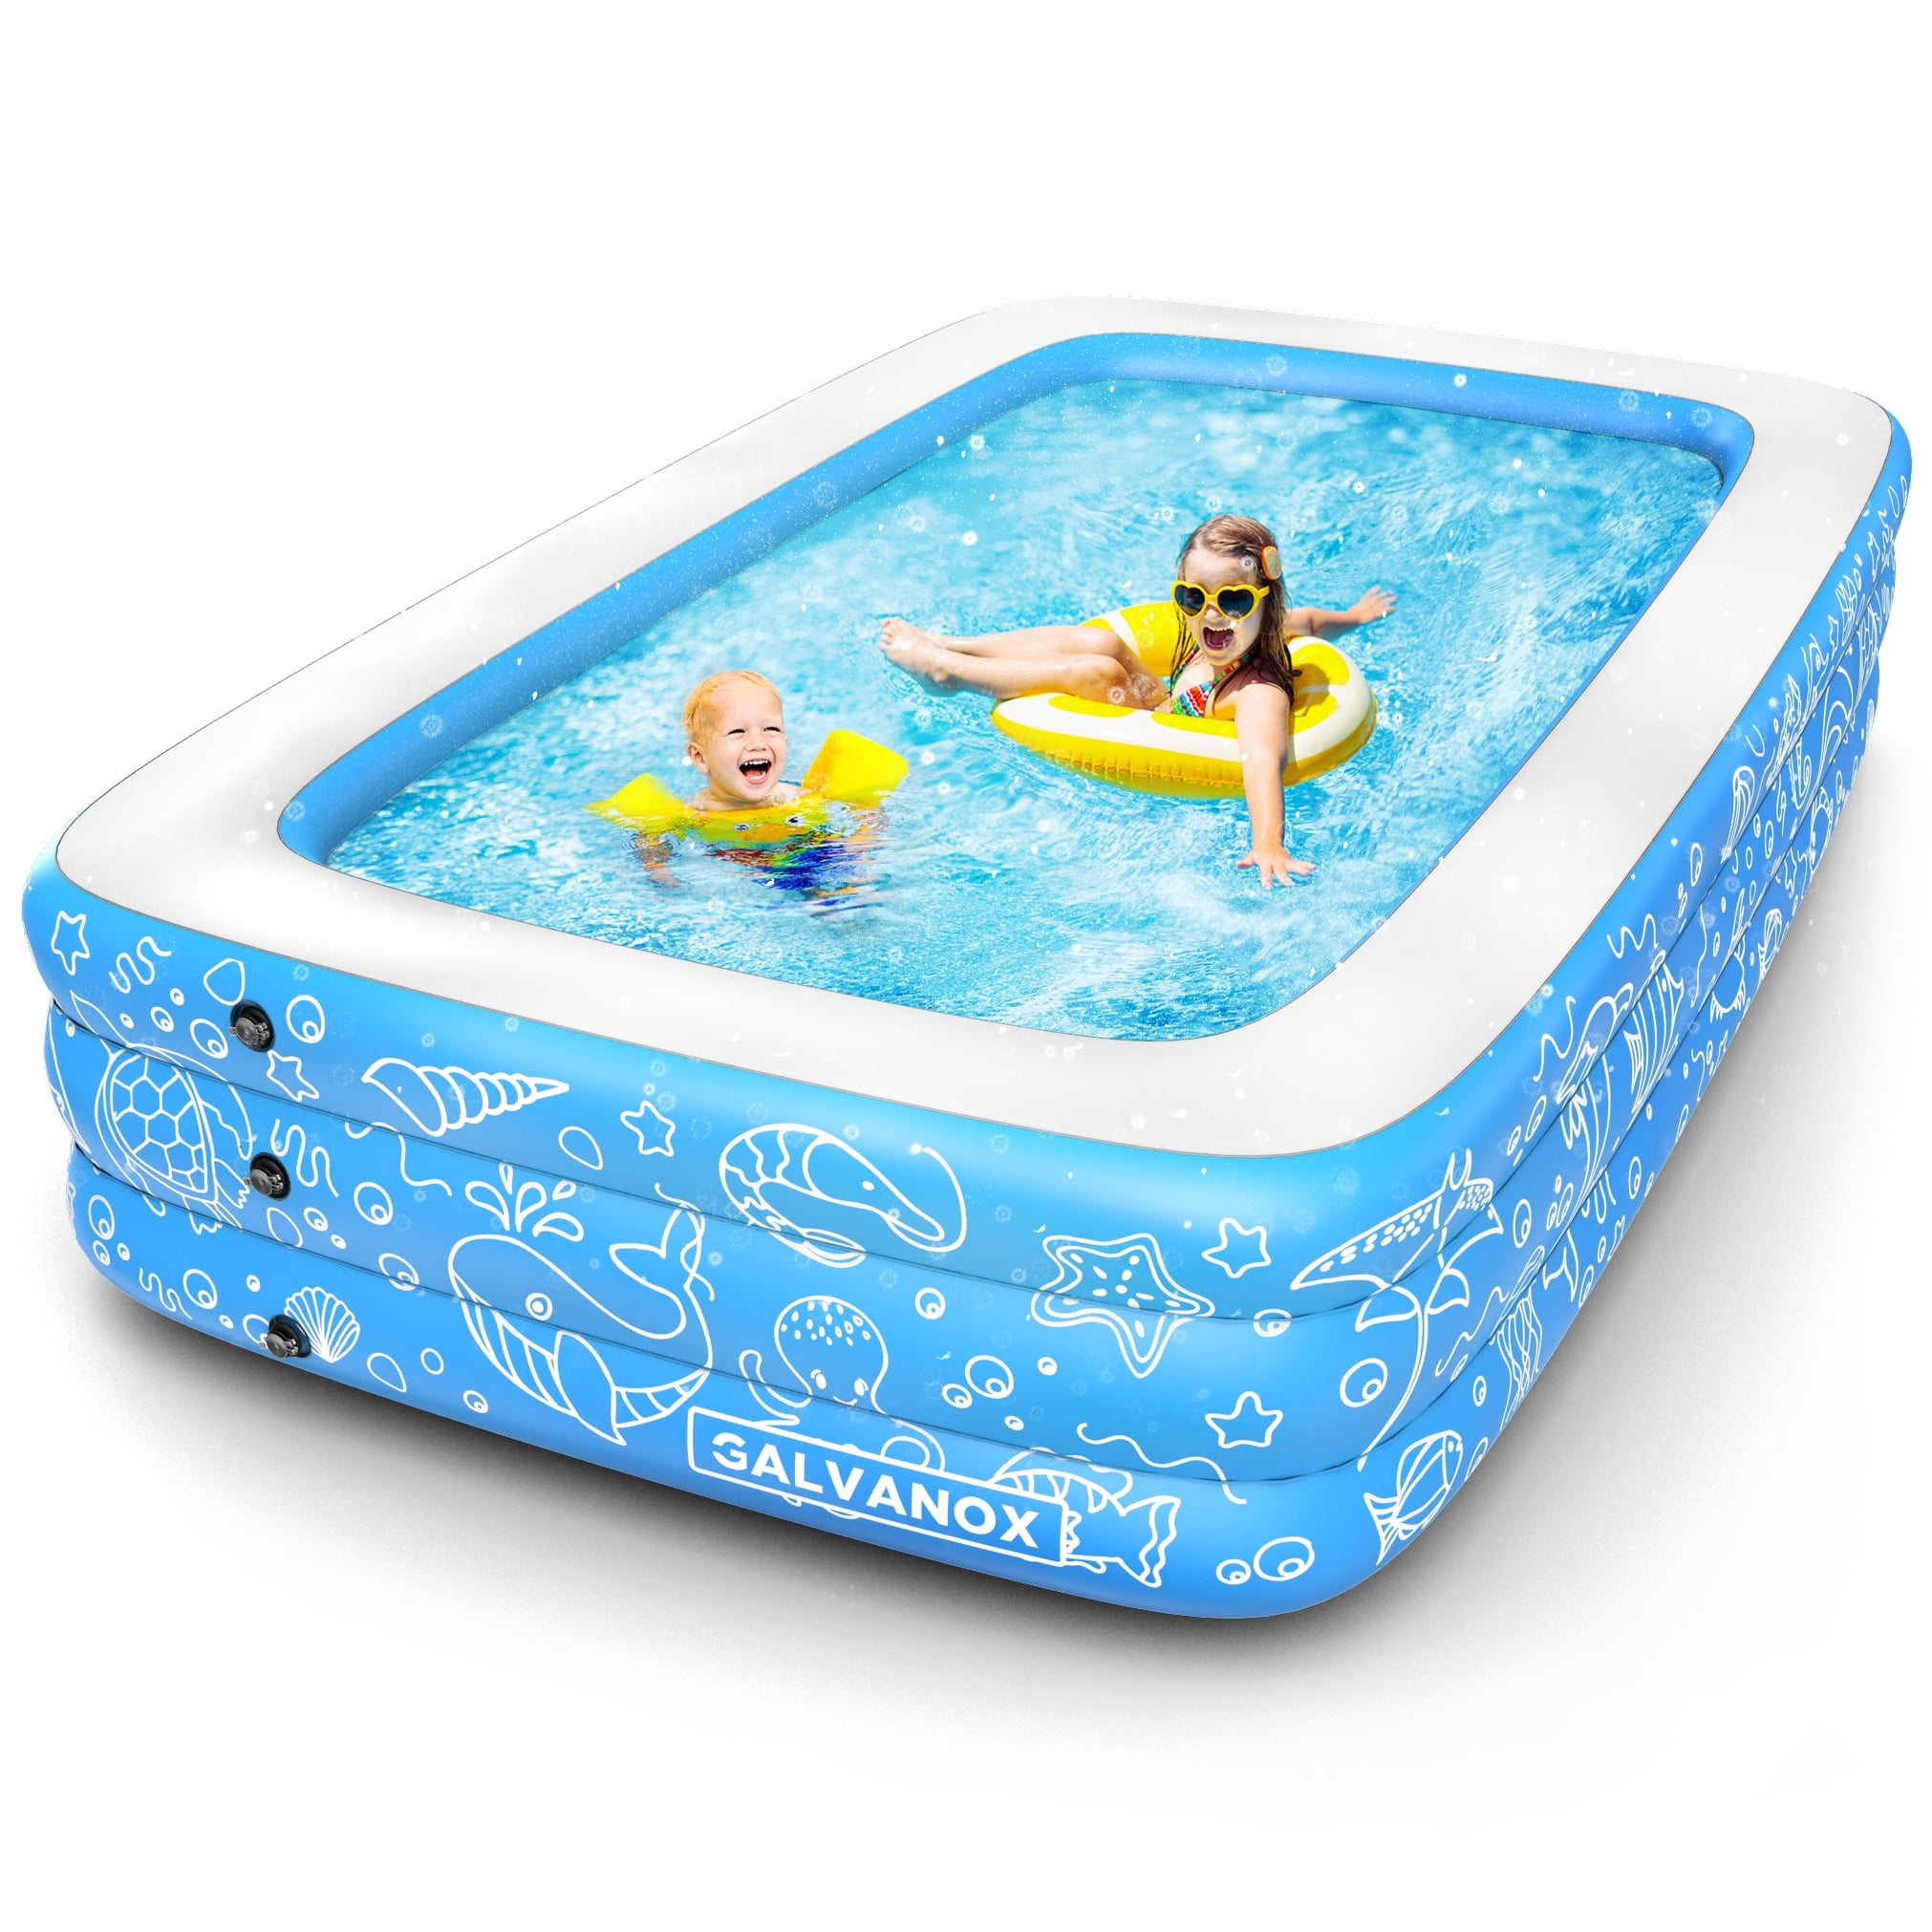 183cm family inflatable pool above ground swimming pool kid adult children blue